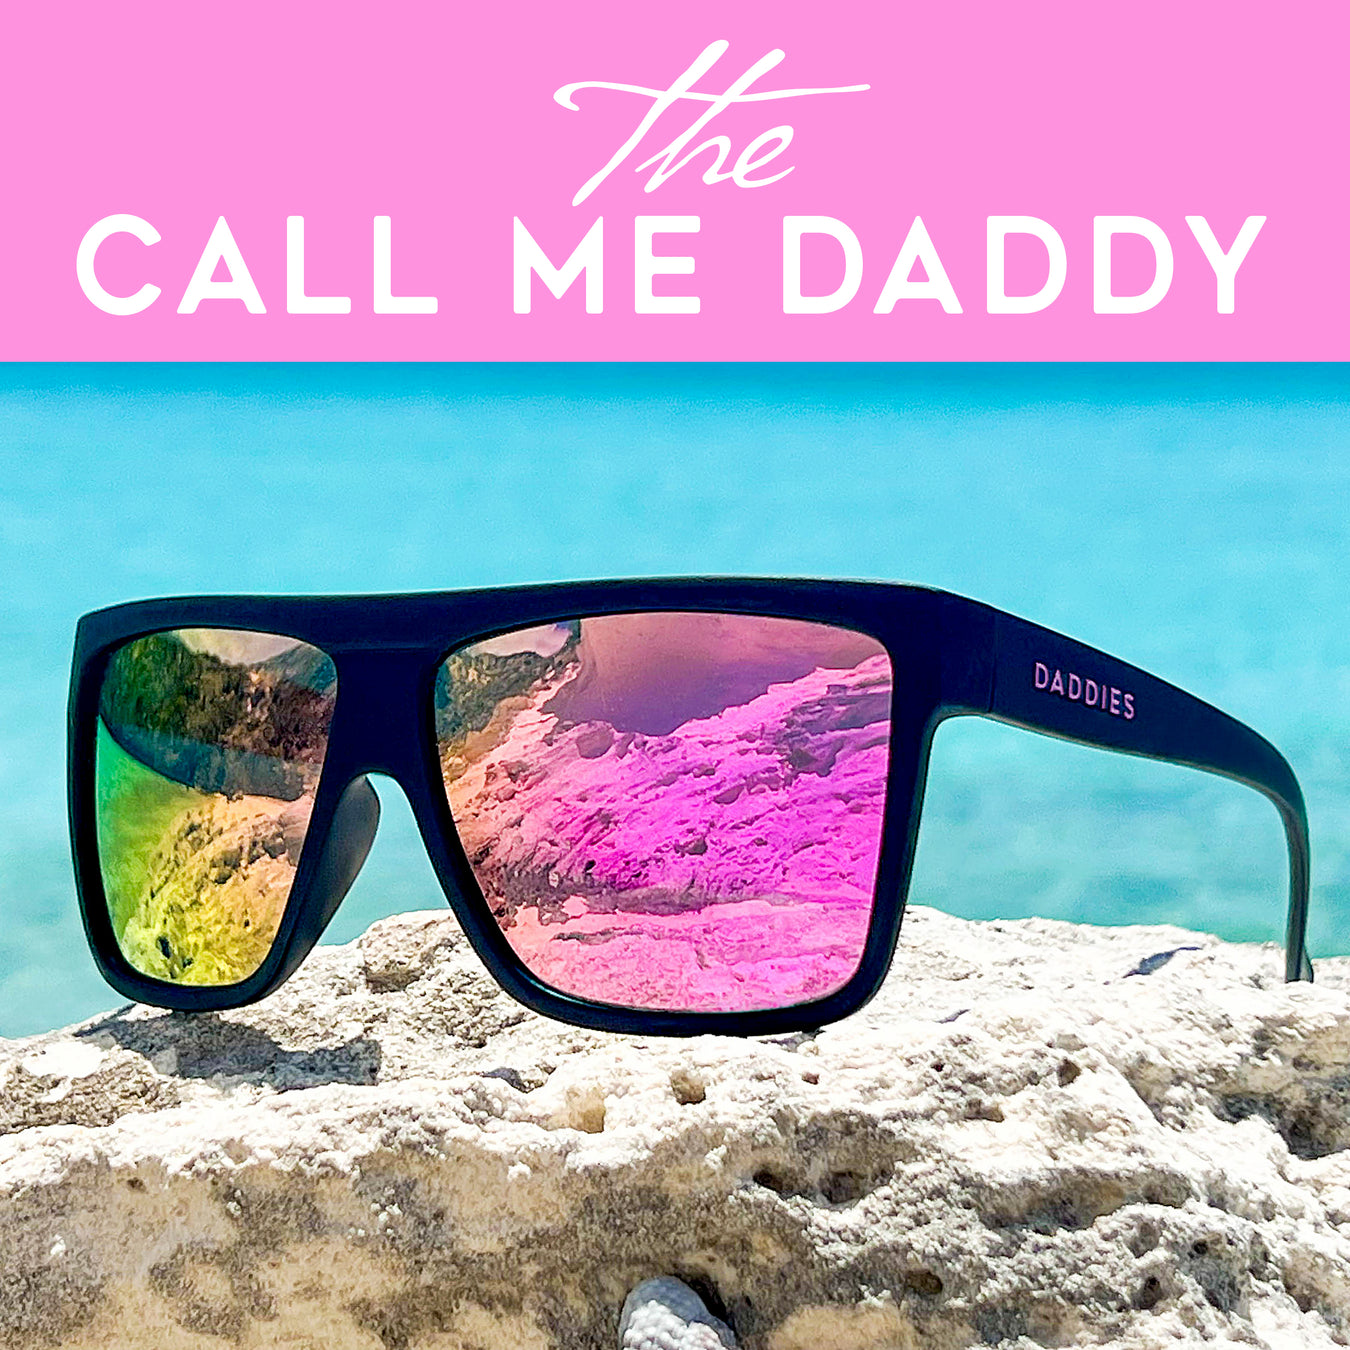 Call Me Daddy Sunglasses by Daddies Eyewear, Black Sunglasses with Pink Lenses